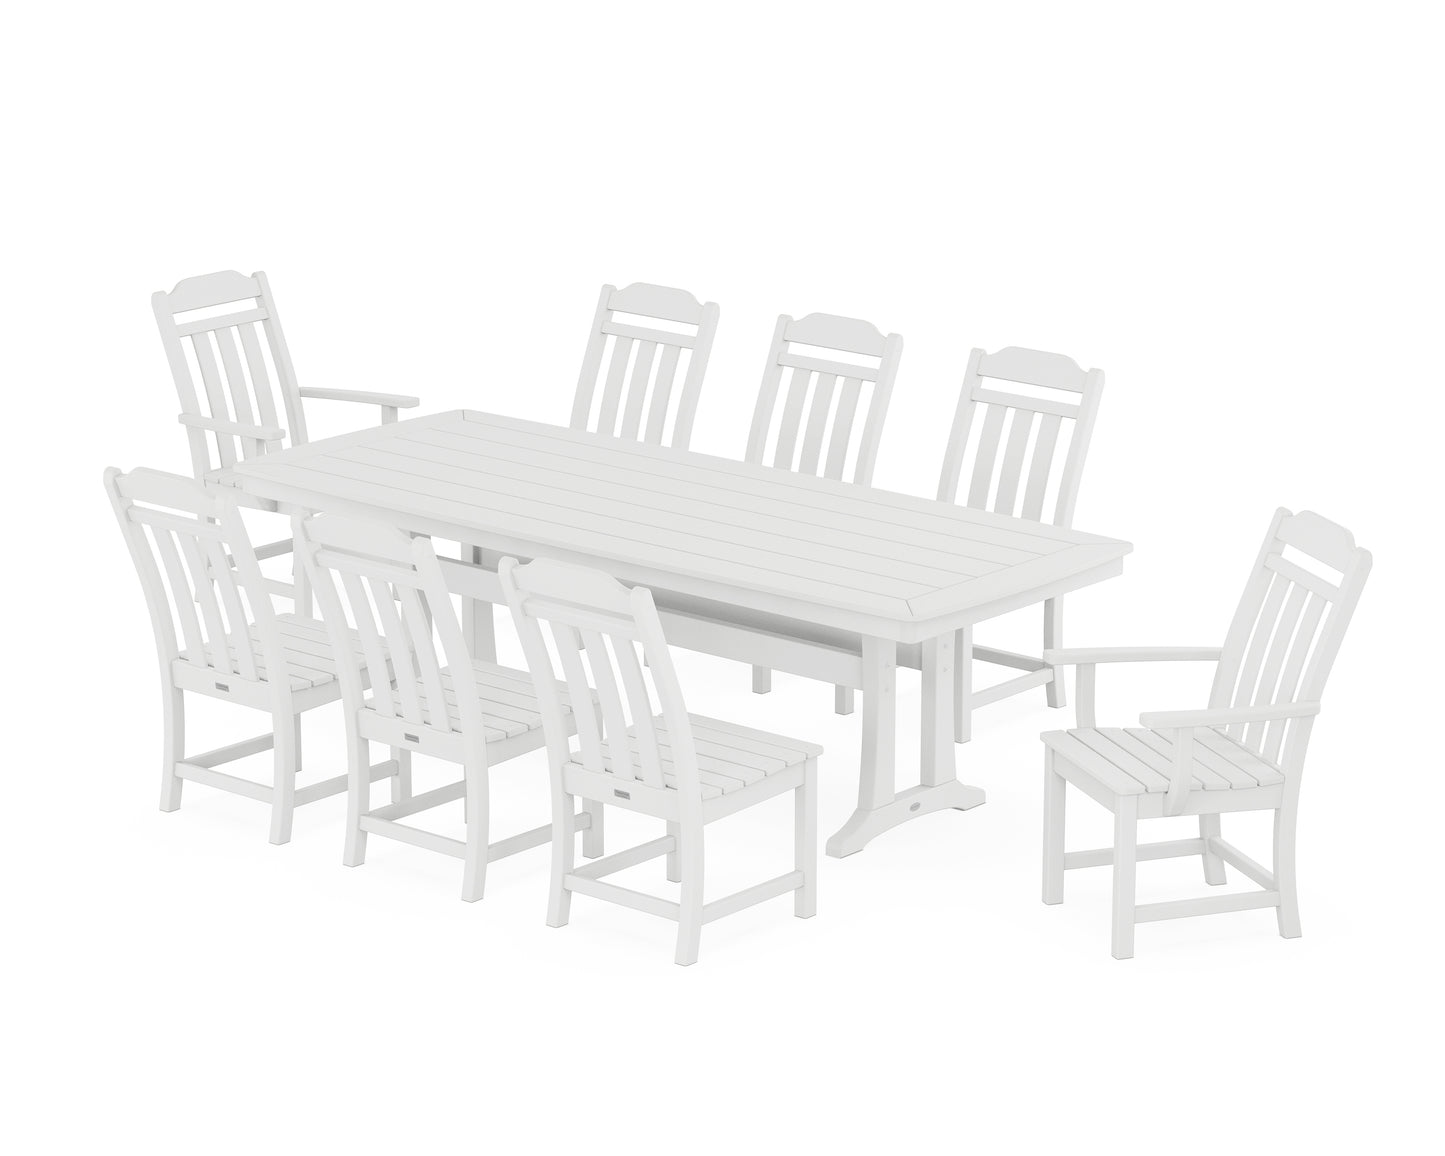 Country Living 9-Piece Dining Set with Trestle Legs